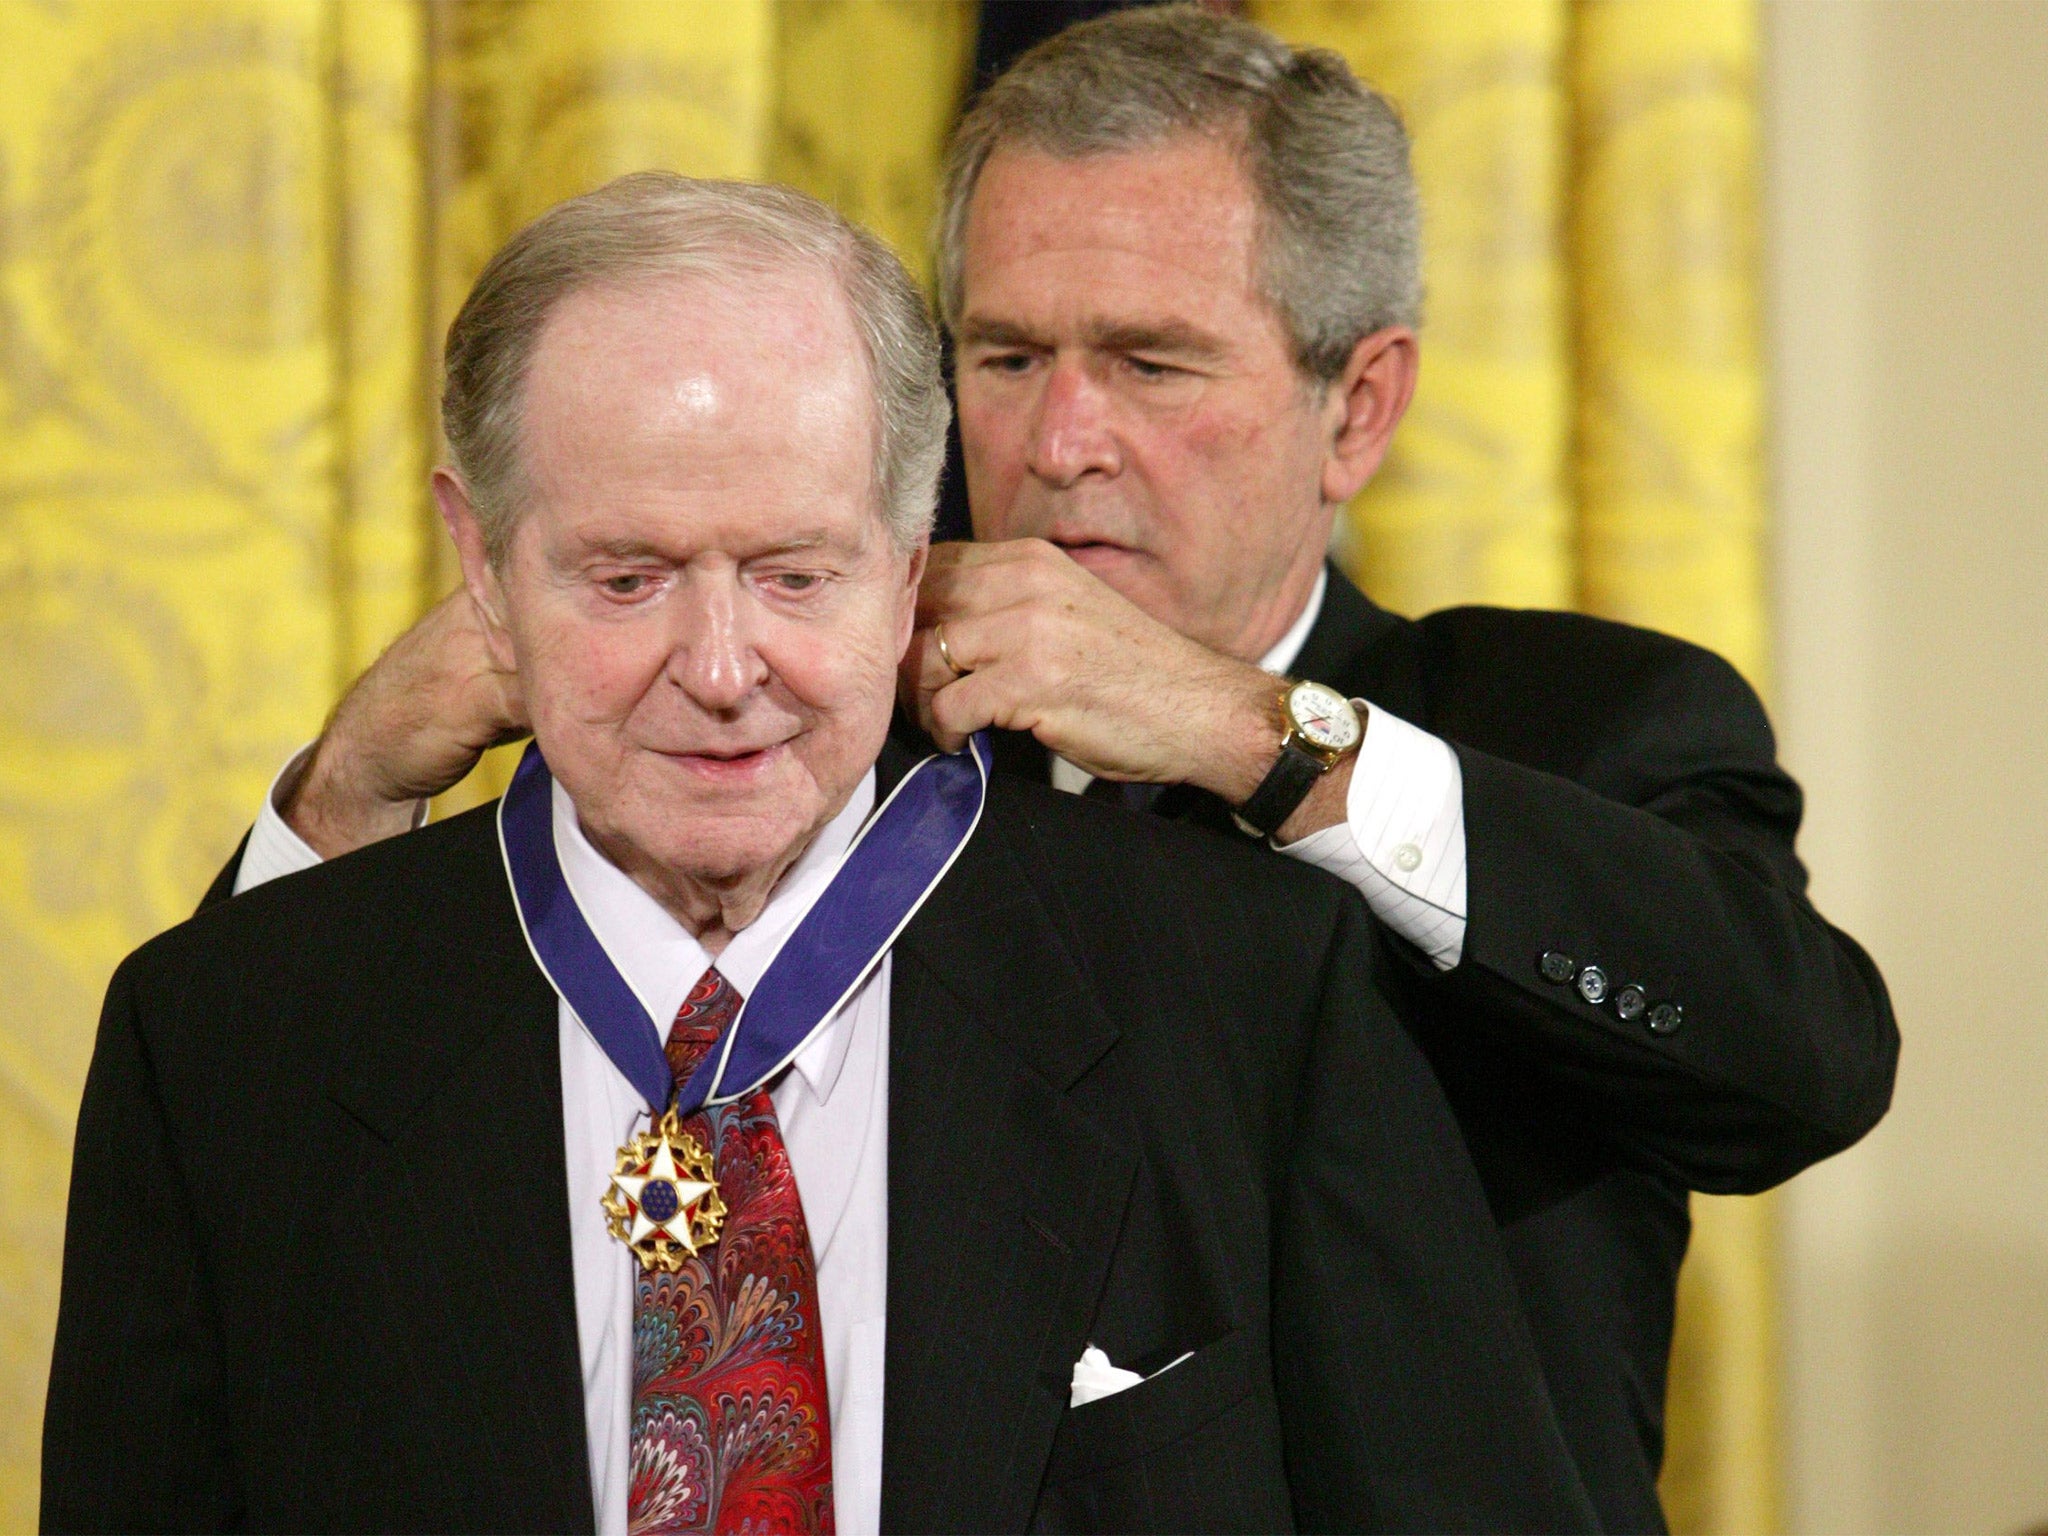 Conquest receives the Presidential Medal of Freedom from George W Bush in 2005